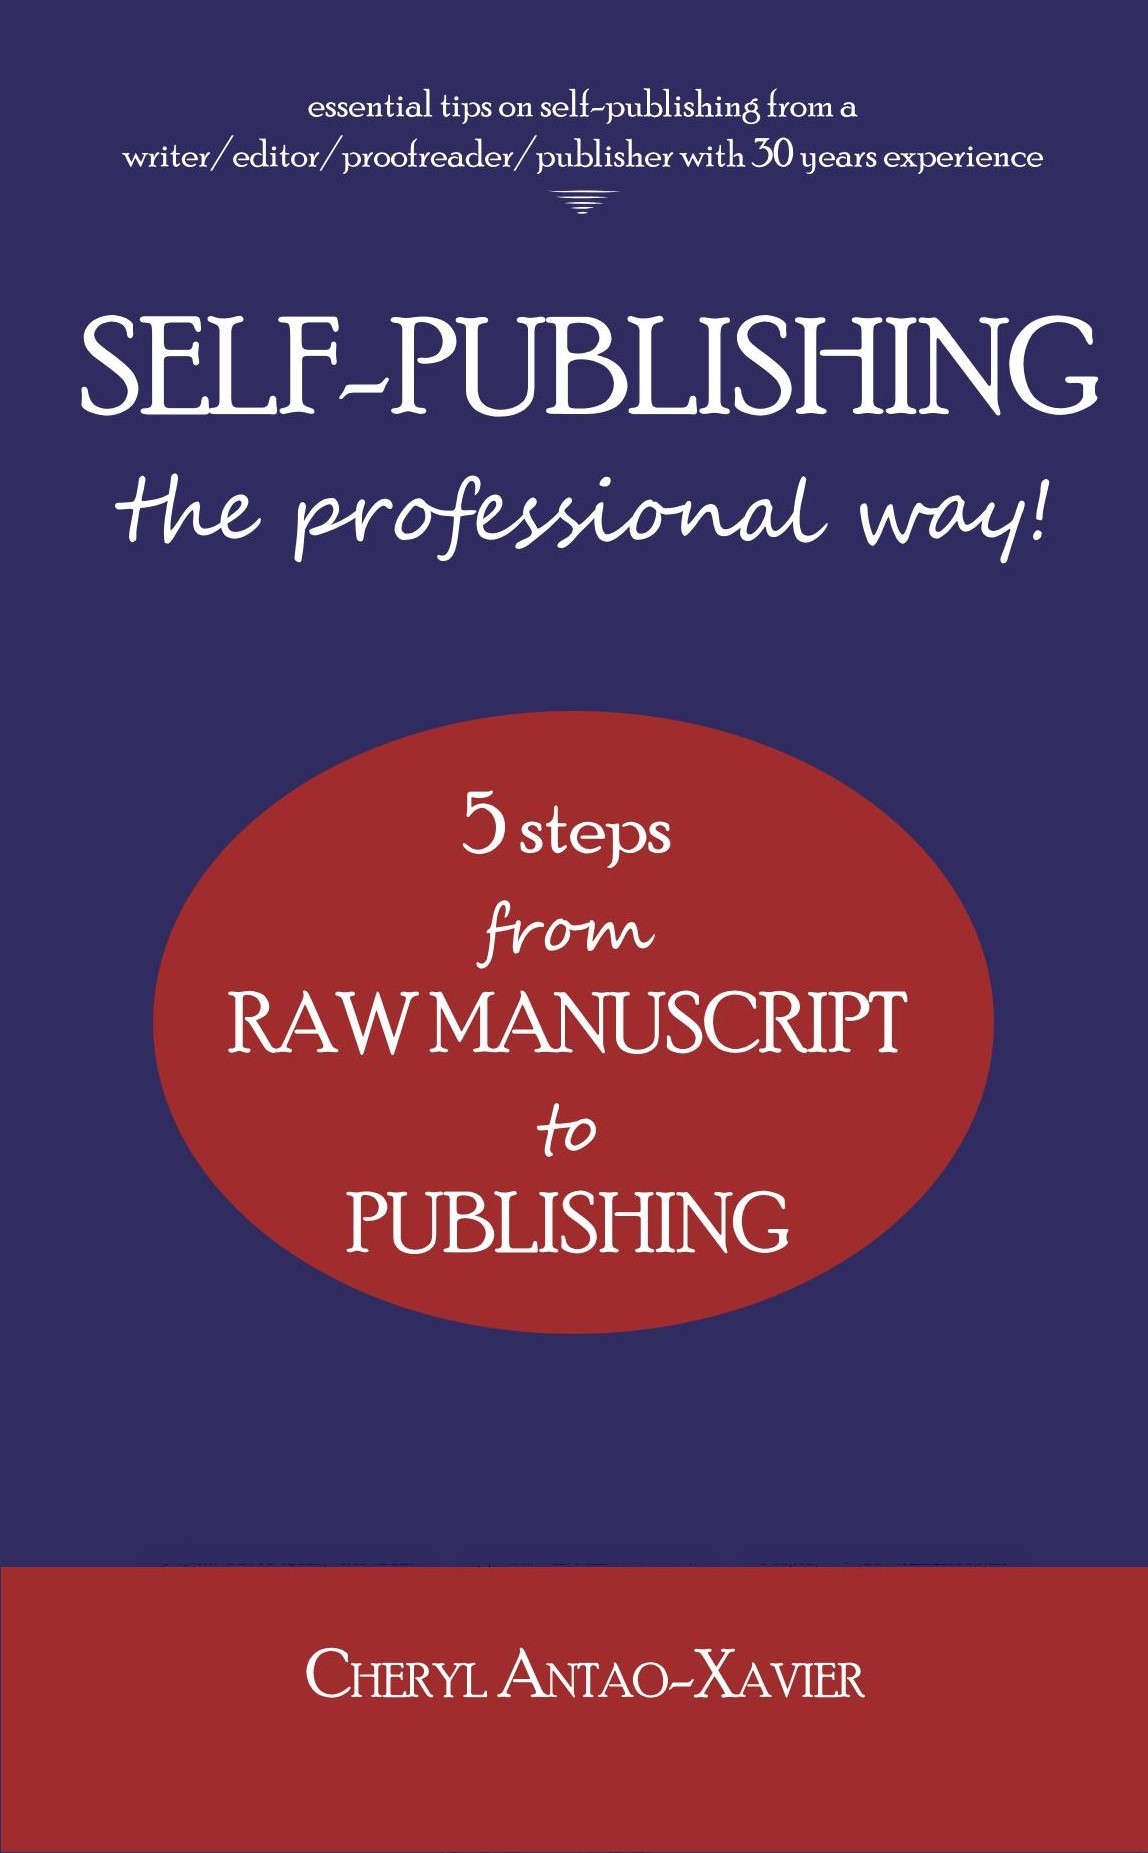 Self-Publishing the professional way! 5 steps from raw manuscript to published book